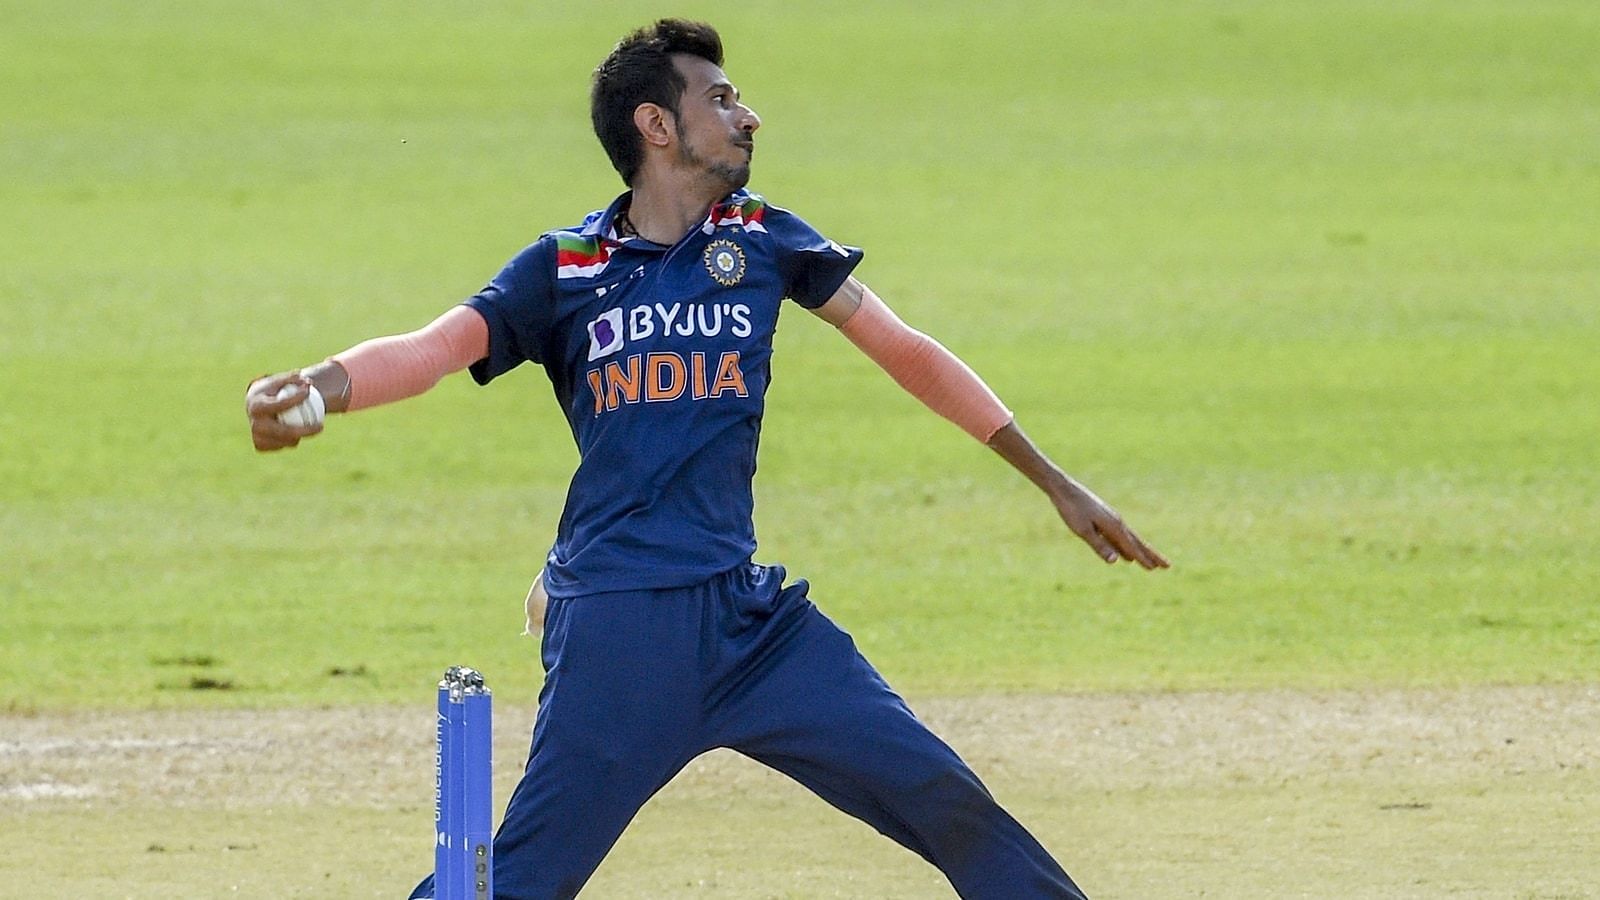 Chahal has gone into a shell with his bowling approach